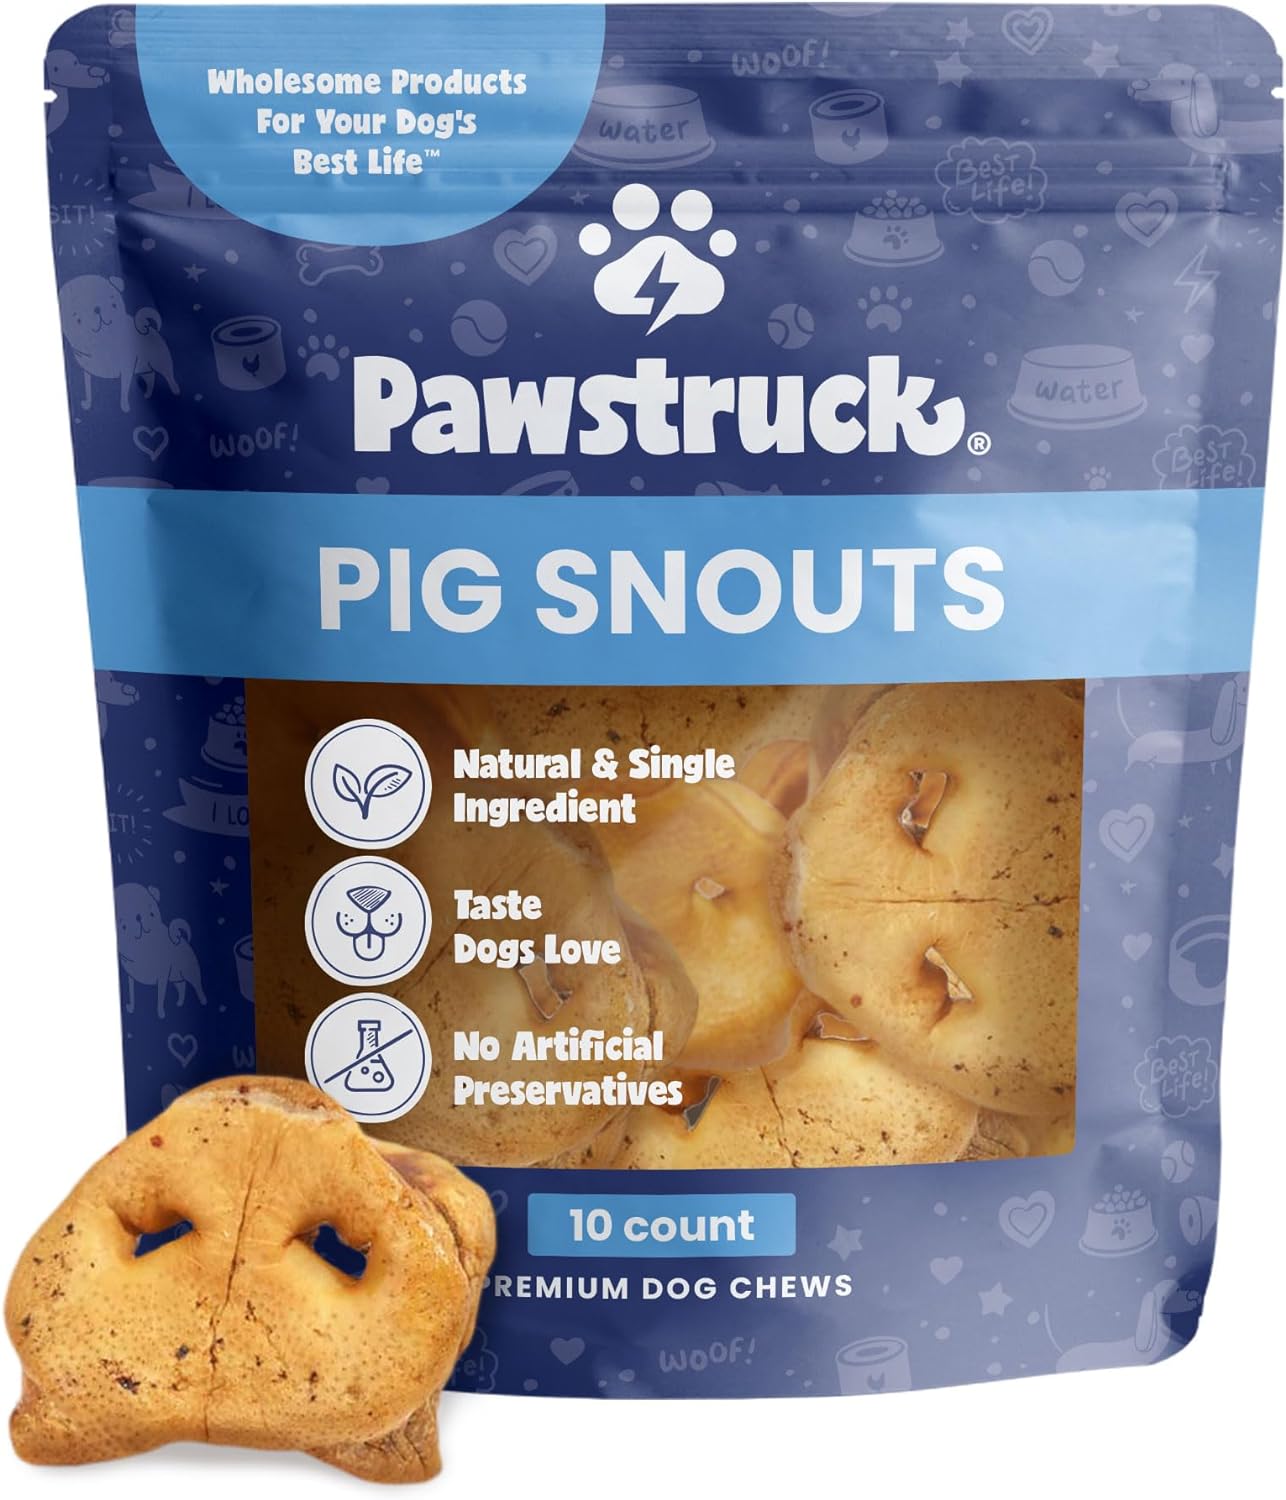 Pawstruck Natural Slow Roasted Pig Snouts for Dogs - Premium Single Ingredient Low Fat Pork Chew Treat for All Breeds - No Artificial Preservatives for All Breeds - 10 Count - Packaging May Vary